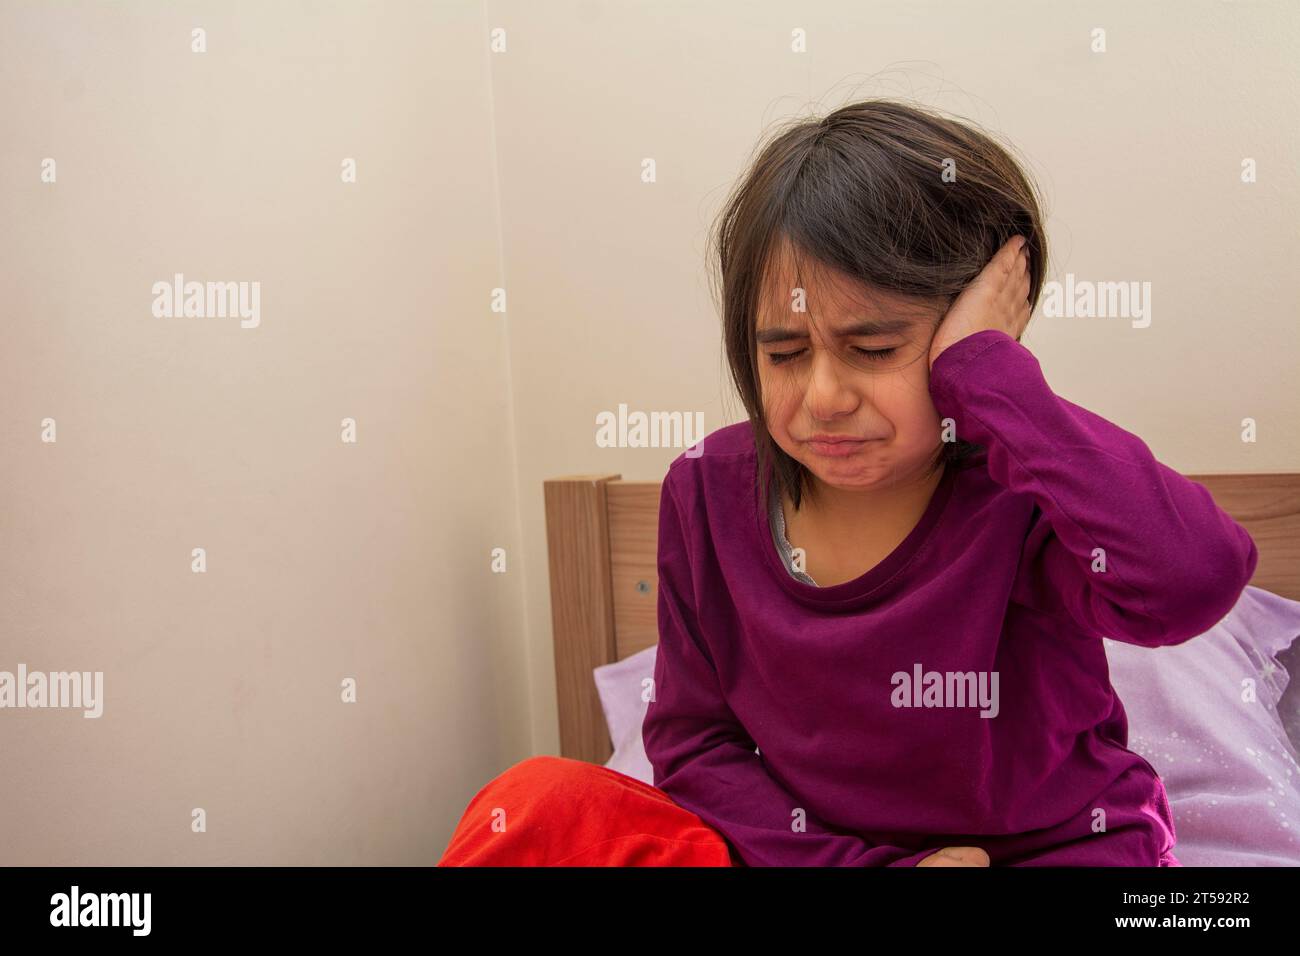 Primary school age girl sitting on her bed with earache Stock Photo